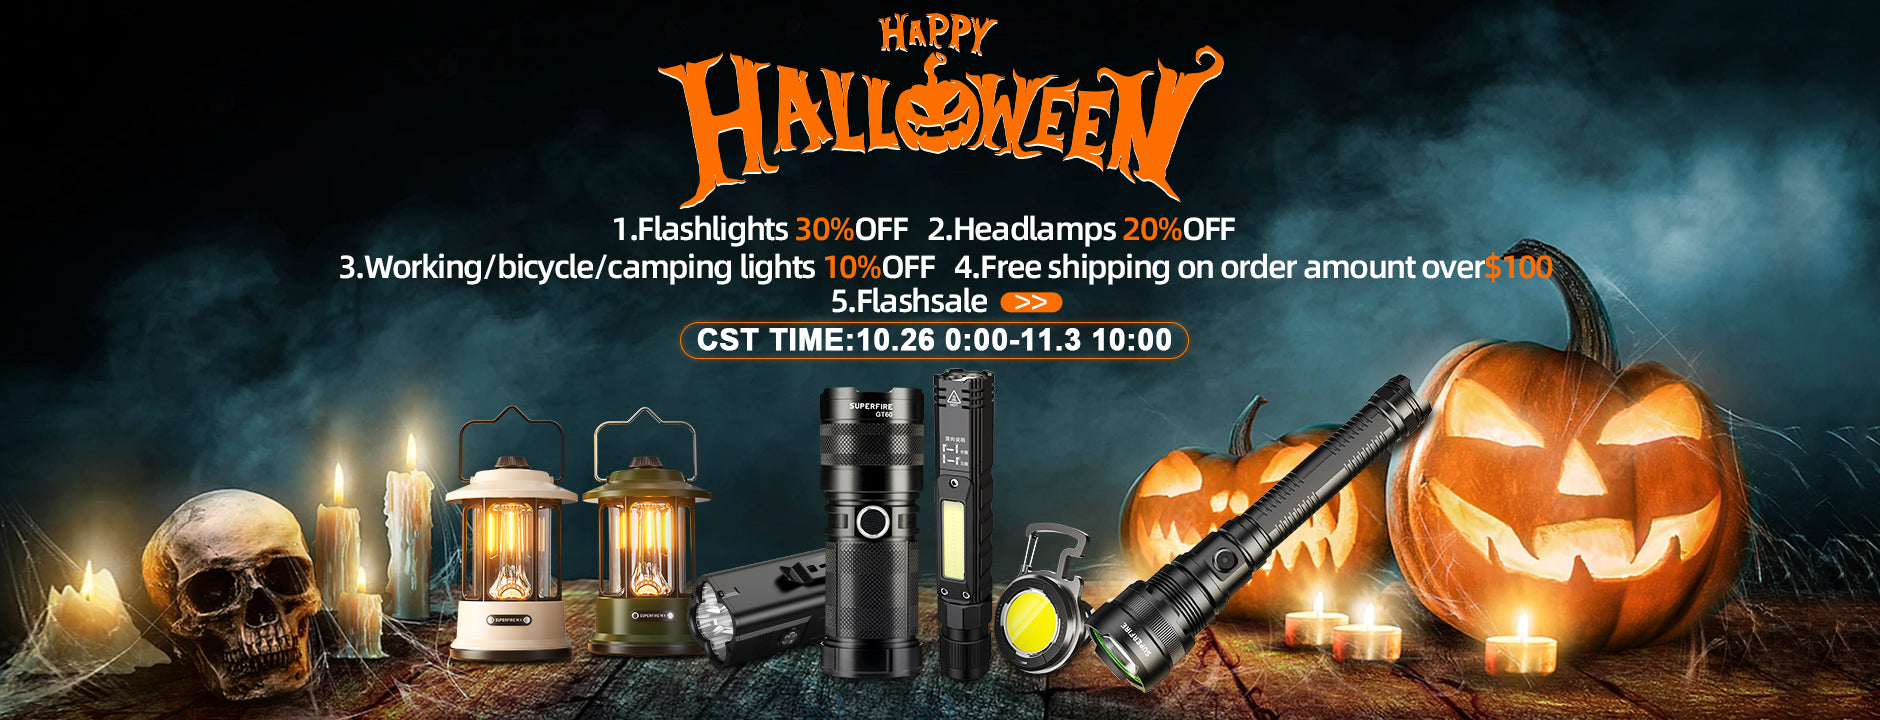 Turn on the SUPERFIRE Flashlight for Your Mysterious Halloween Gifts